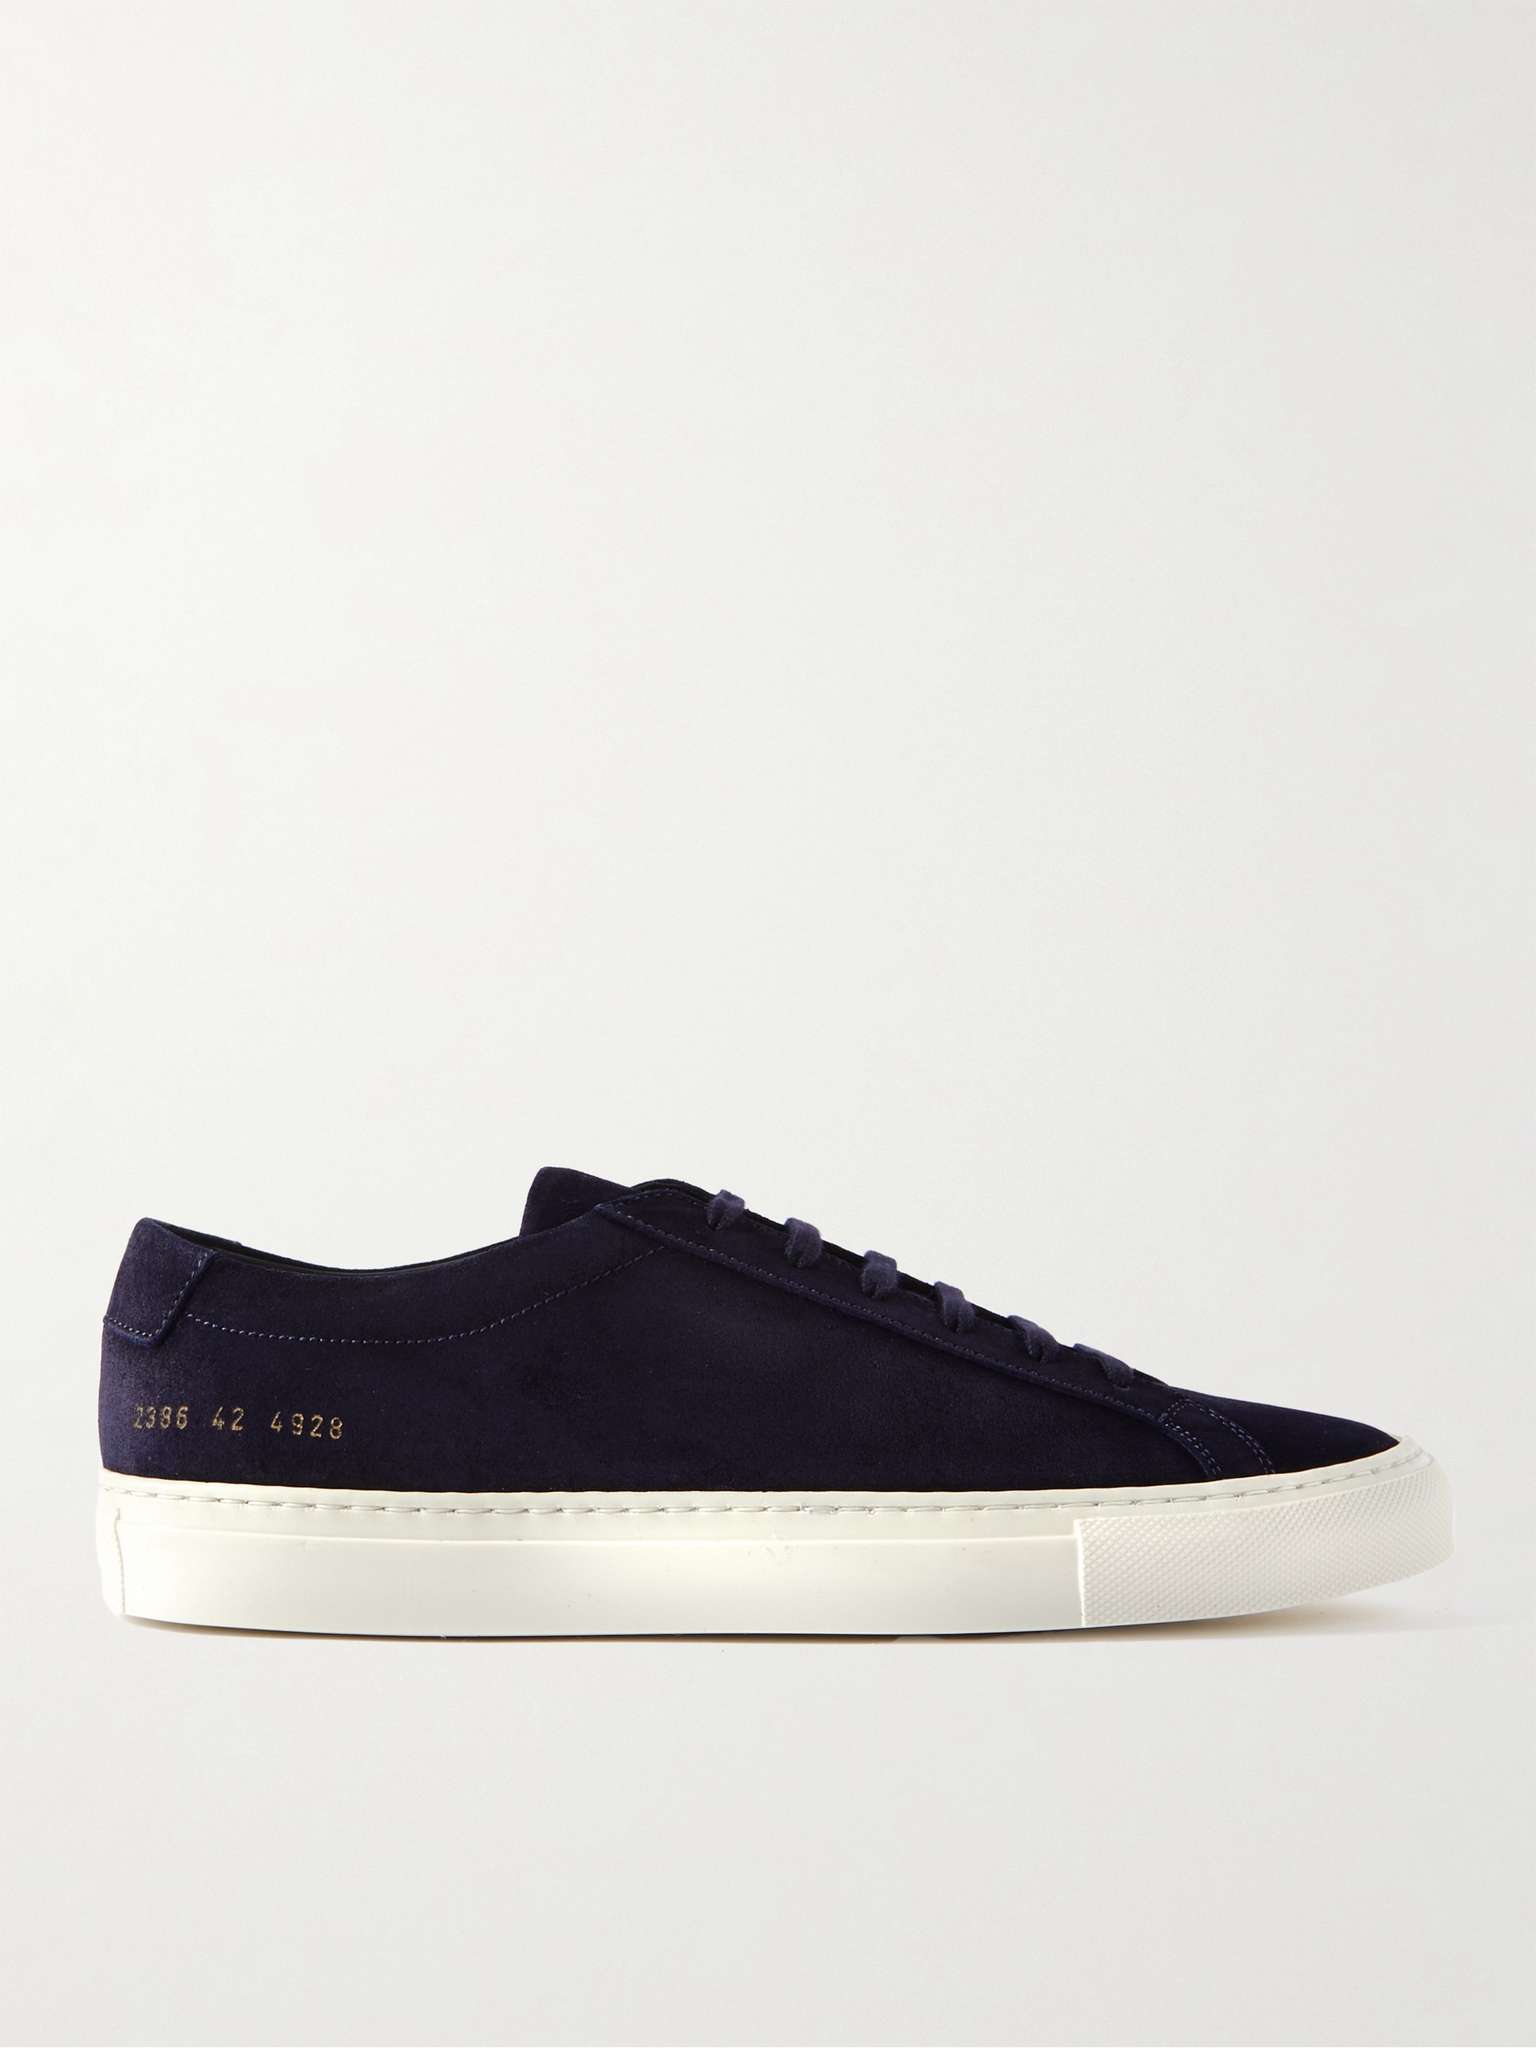 COMMON PROJECTS Original Achilles Waxed-Suede Sneakers for Men | MR PORTER